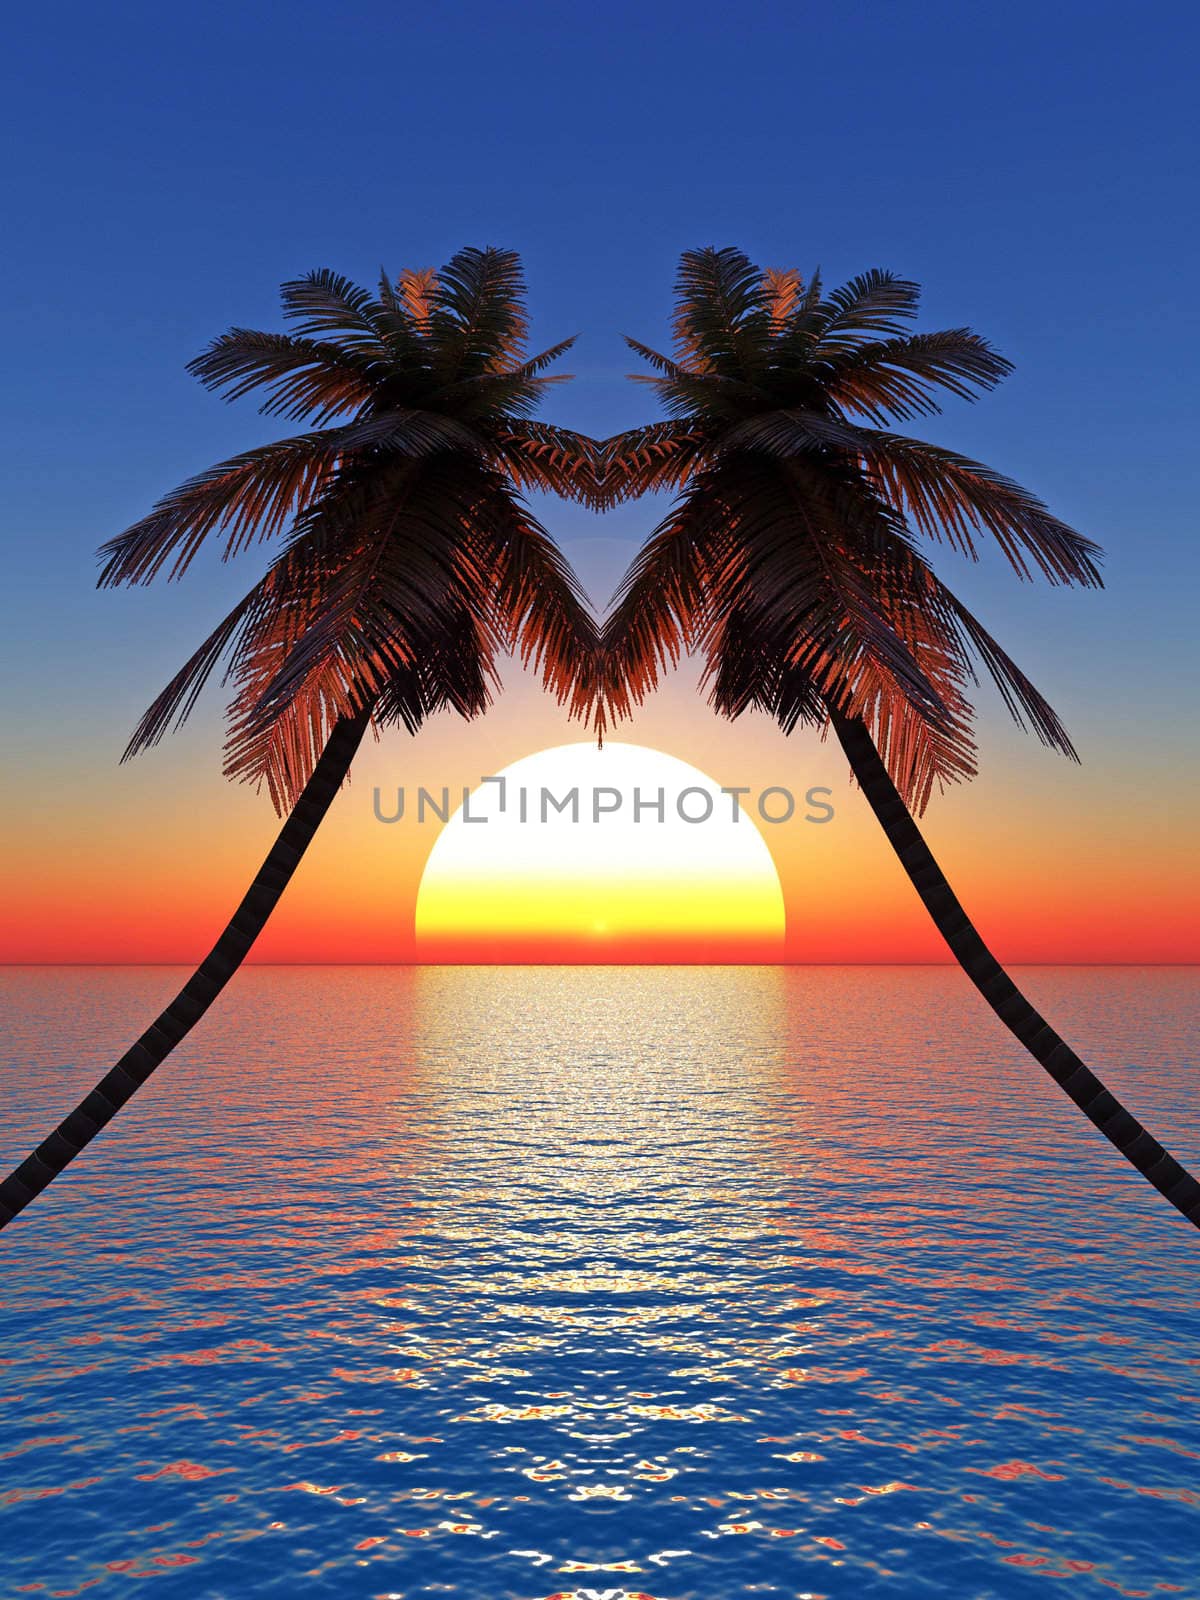 Top of palm trees on a background of a sunset sky